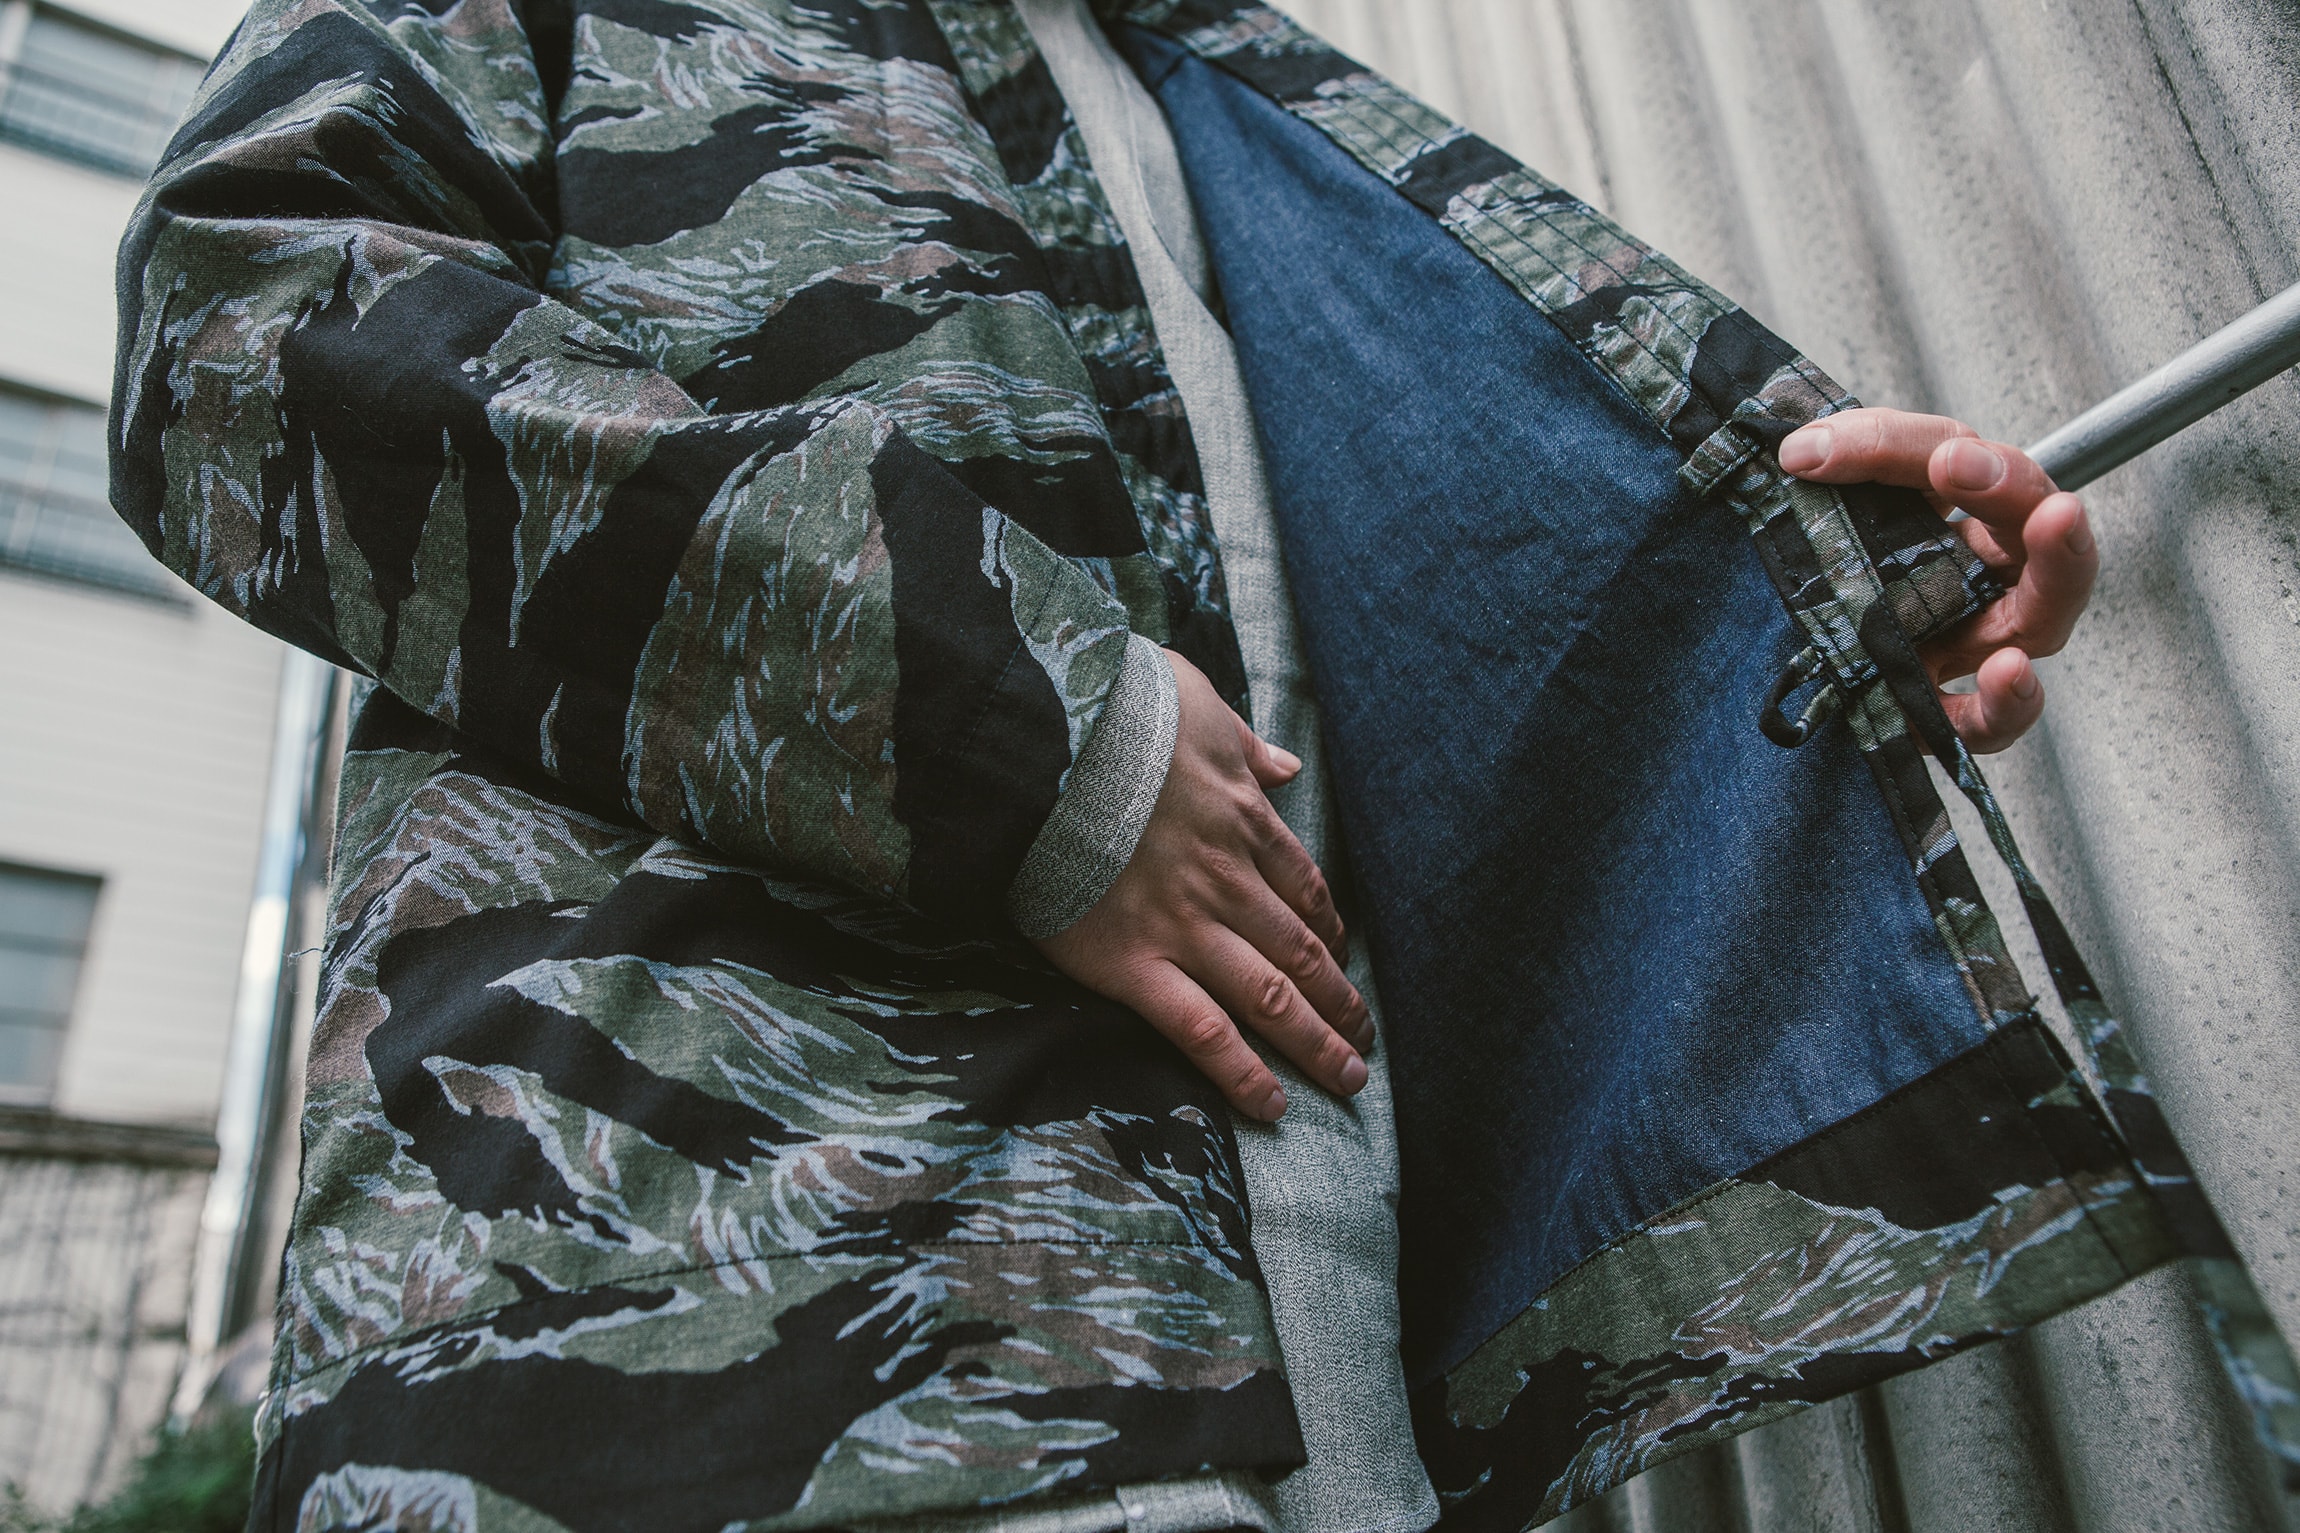 The Common-Folk's Spring/Summer Drop Features Kimono-Inspired Jackets ...